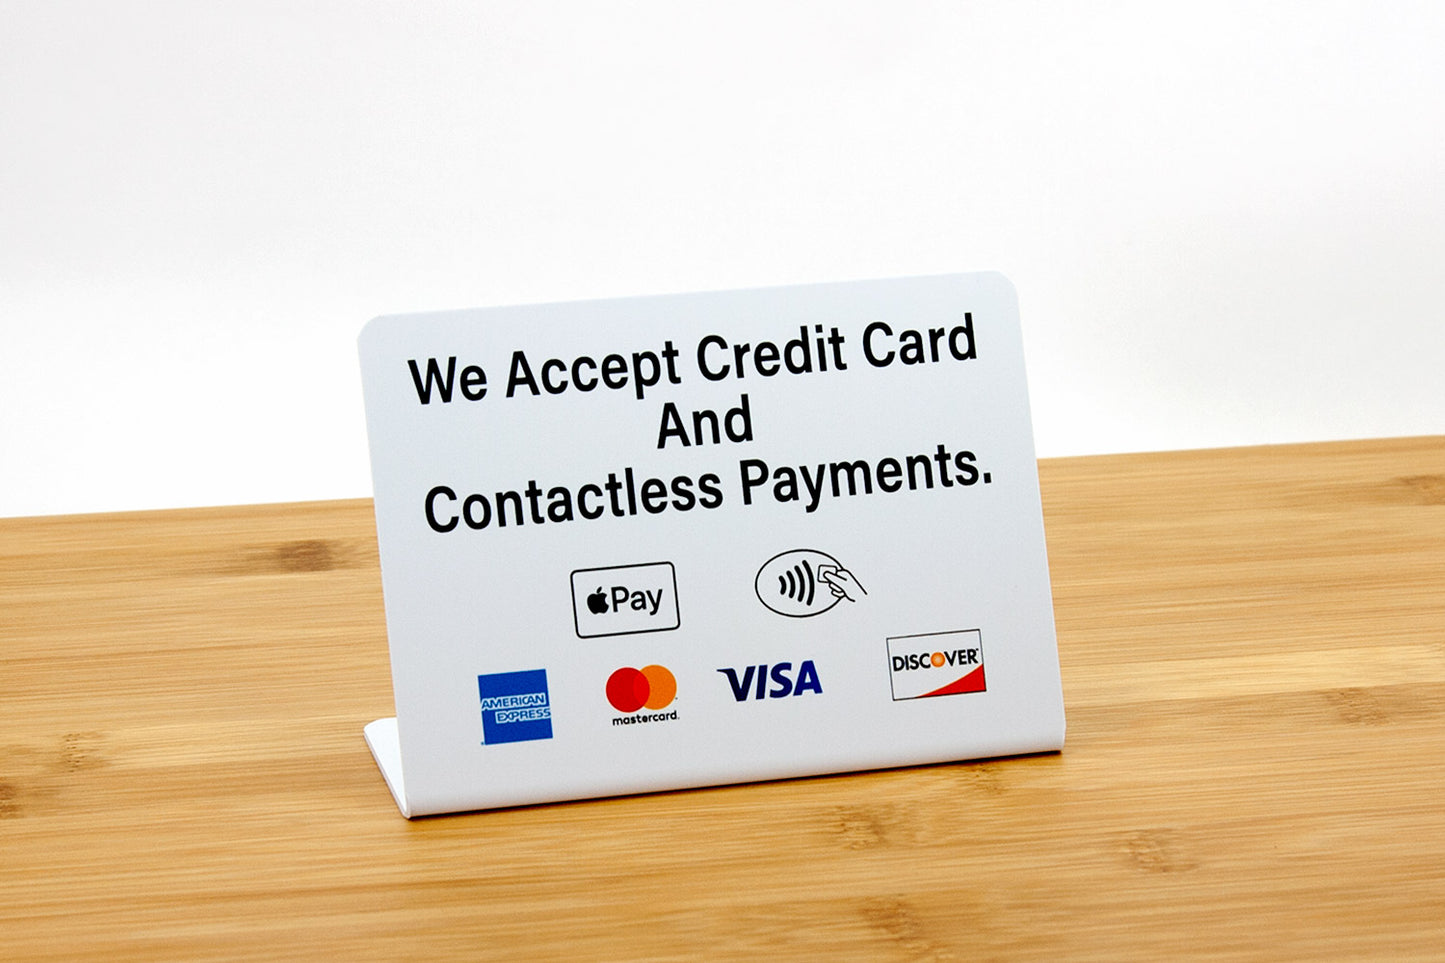 Credit Card & Contactless Payment Signs